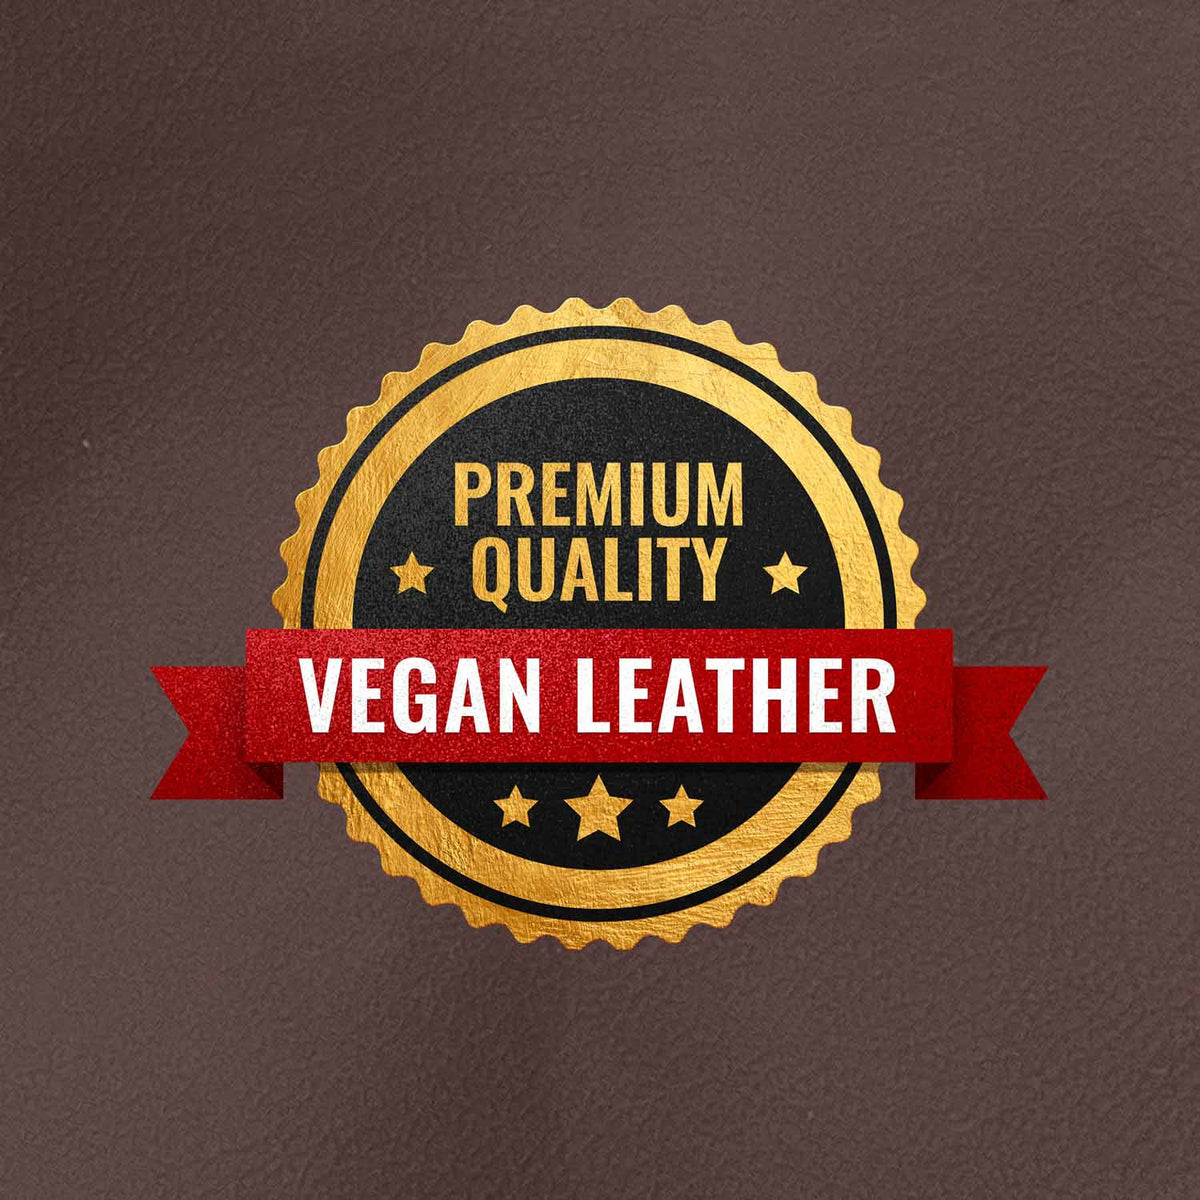 Leather Apron, Cross-back Straps, Reinforced, for Barbers - Vegan Leather - Black or Brown - Under NY Sky